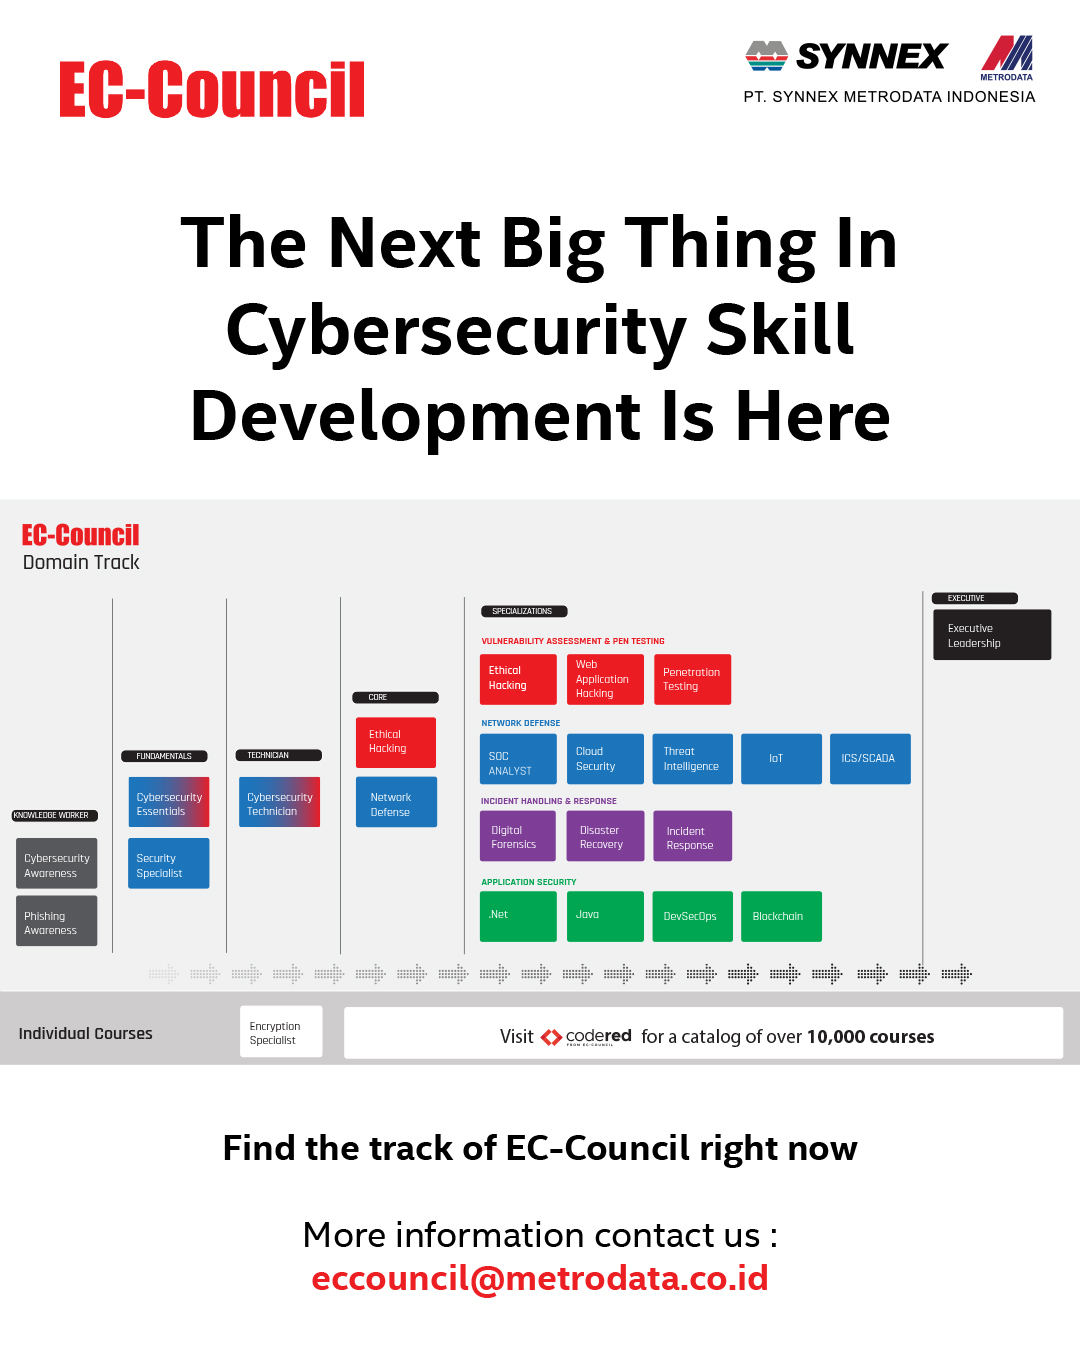 https://www.synnexmetrodata.com/wp-content/uploads/2022/06/EDM-EC-Council-The-Next-Big-Thing-In-Cybersecurity-Skill-Development-Is-Here-1.jpg